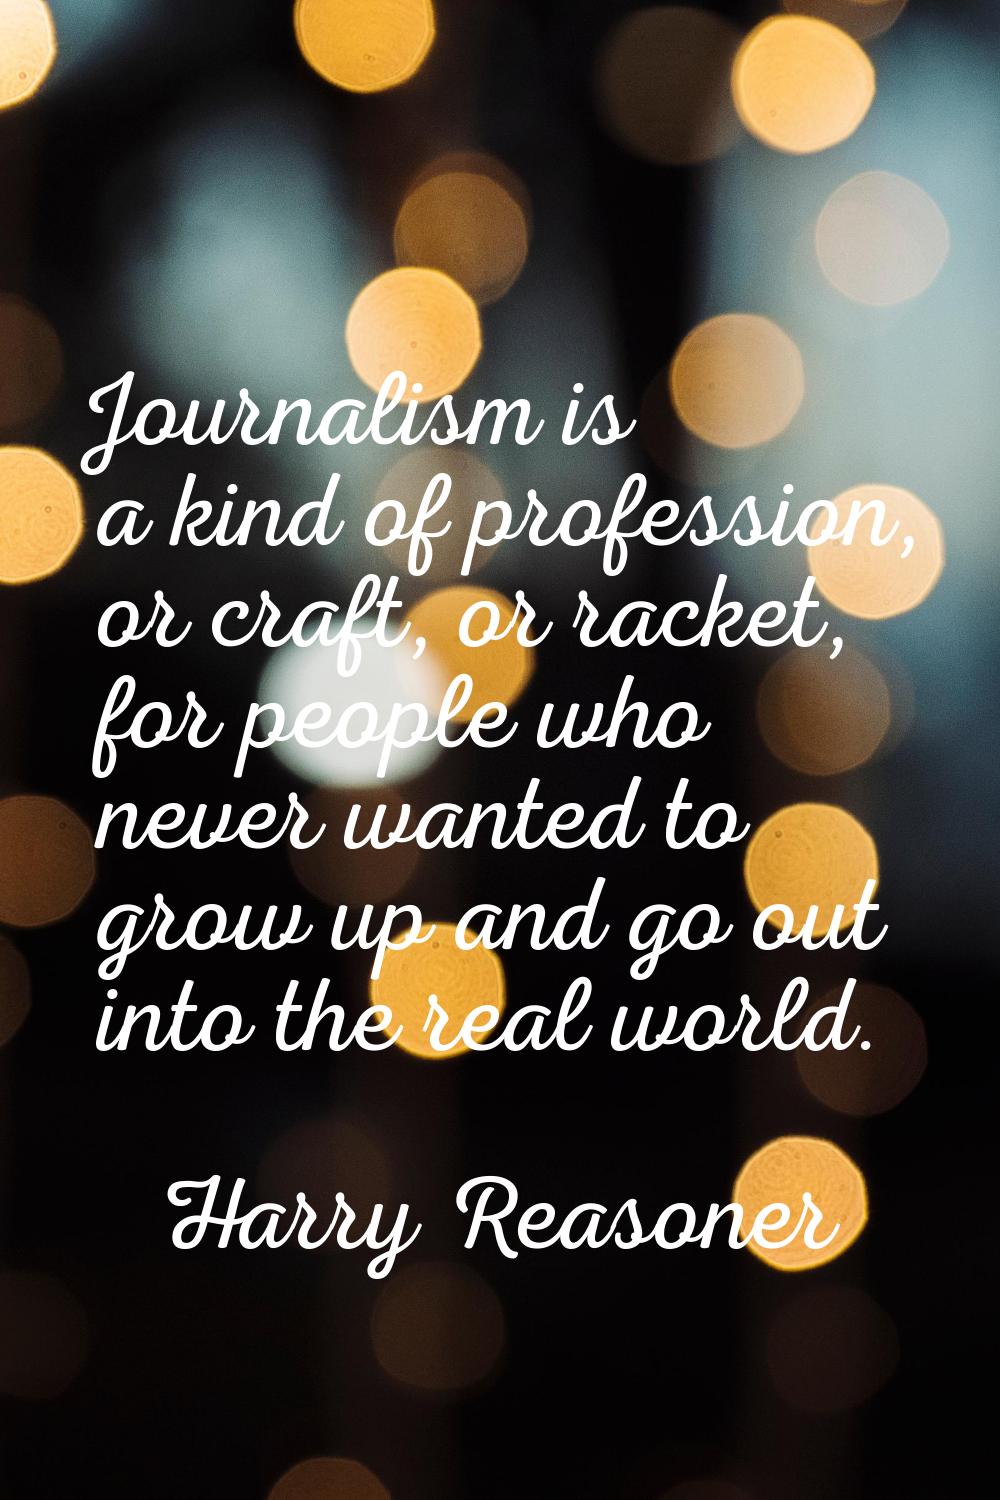 Journalism is a kind of profession, or craft, or racket, for people who never wanted to grow up and